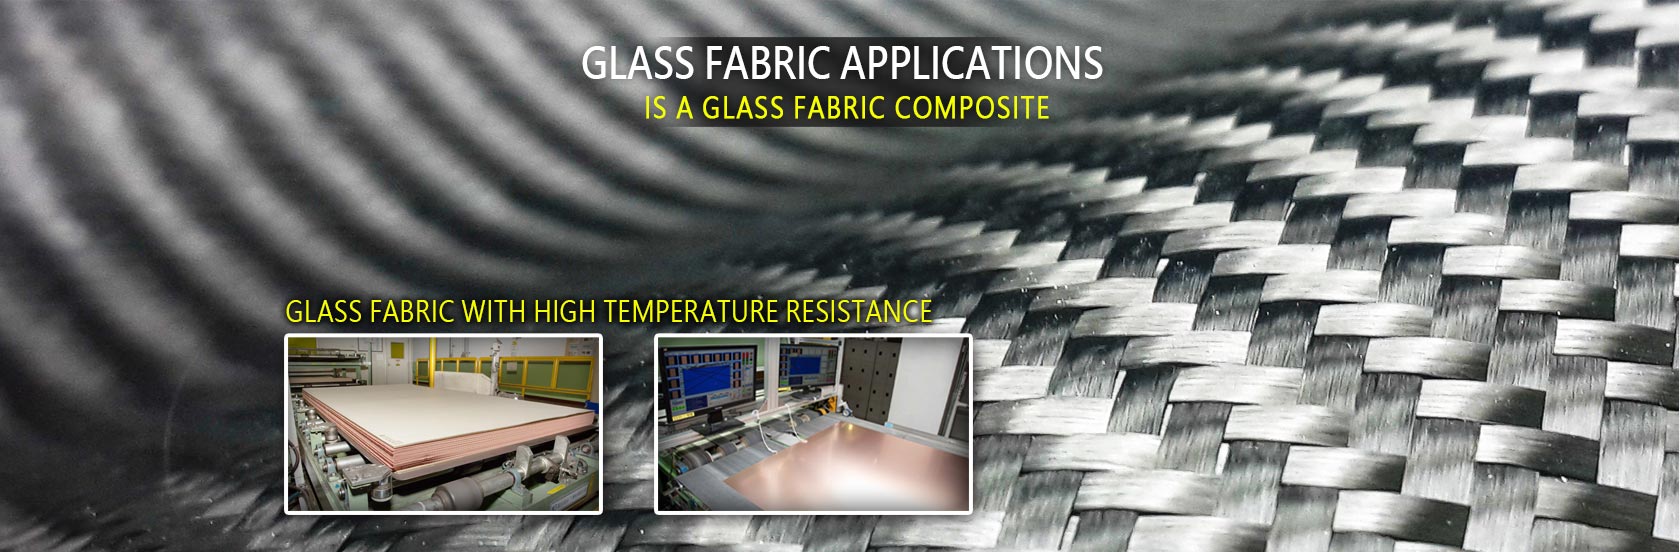 Glass fabric Applications